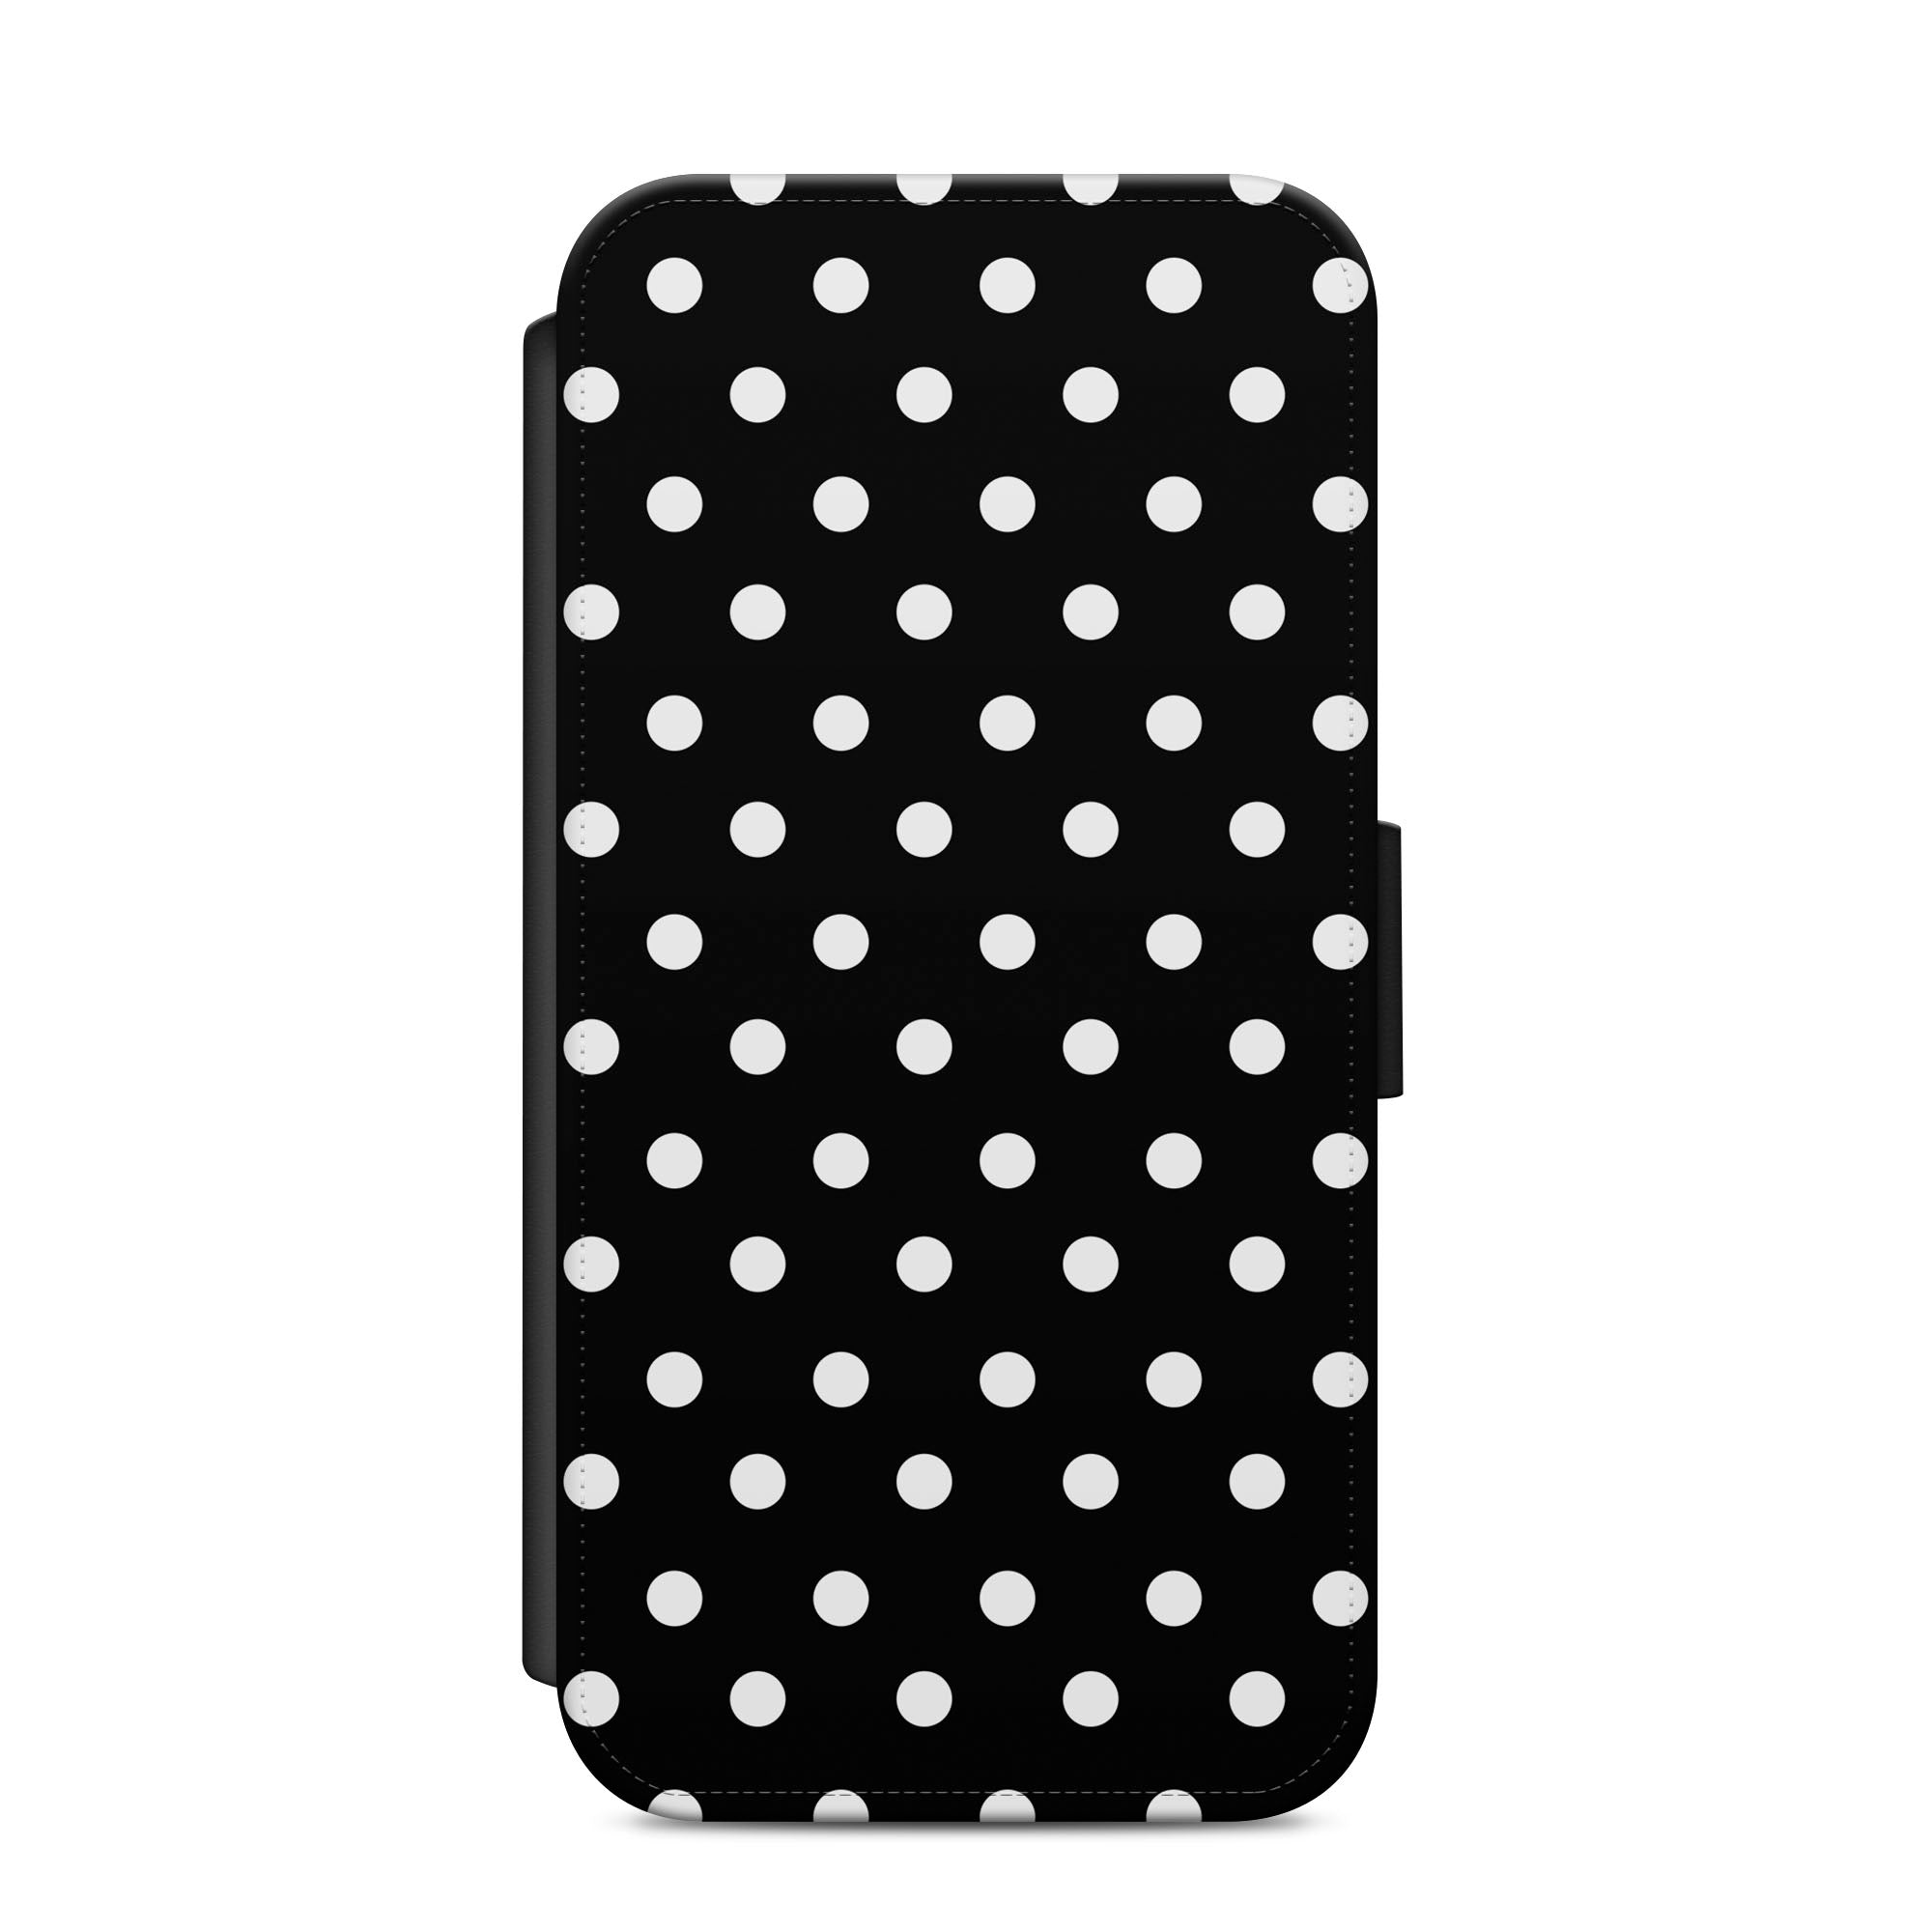 Black & White Polka Dots Faux Leather Flip Case Wallet for iPhone / Samsung